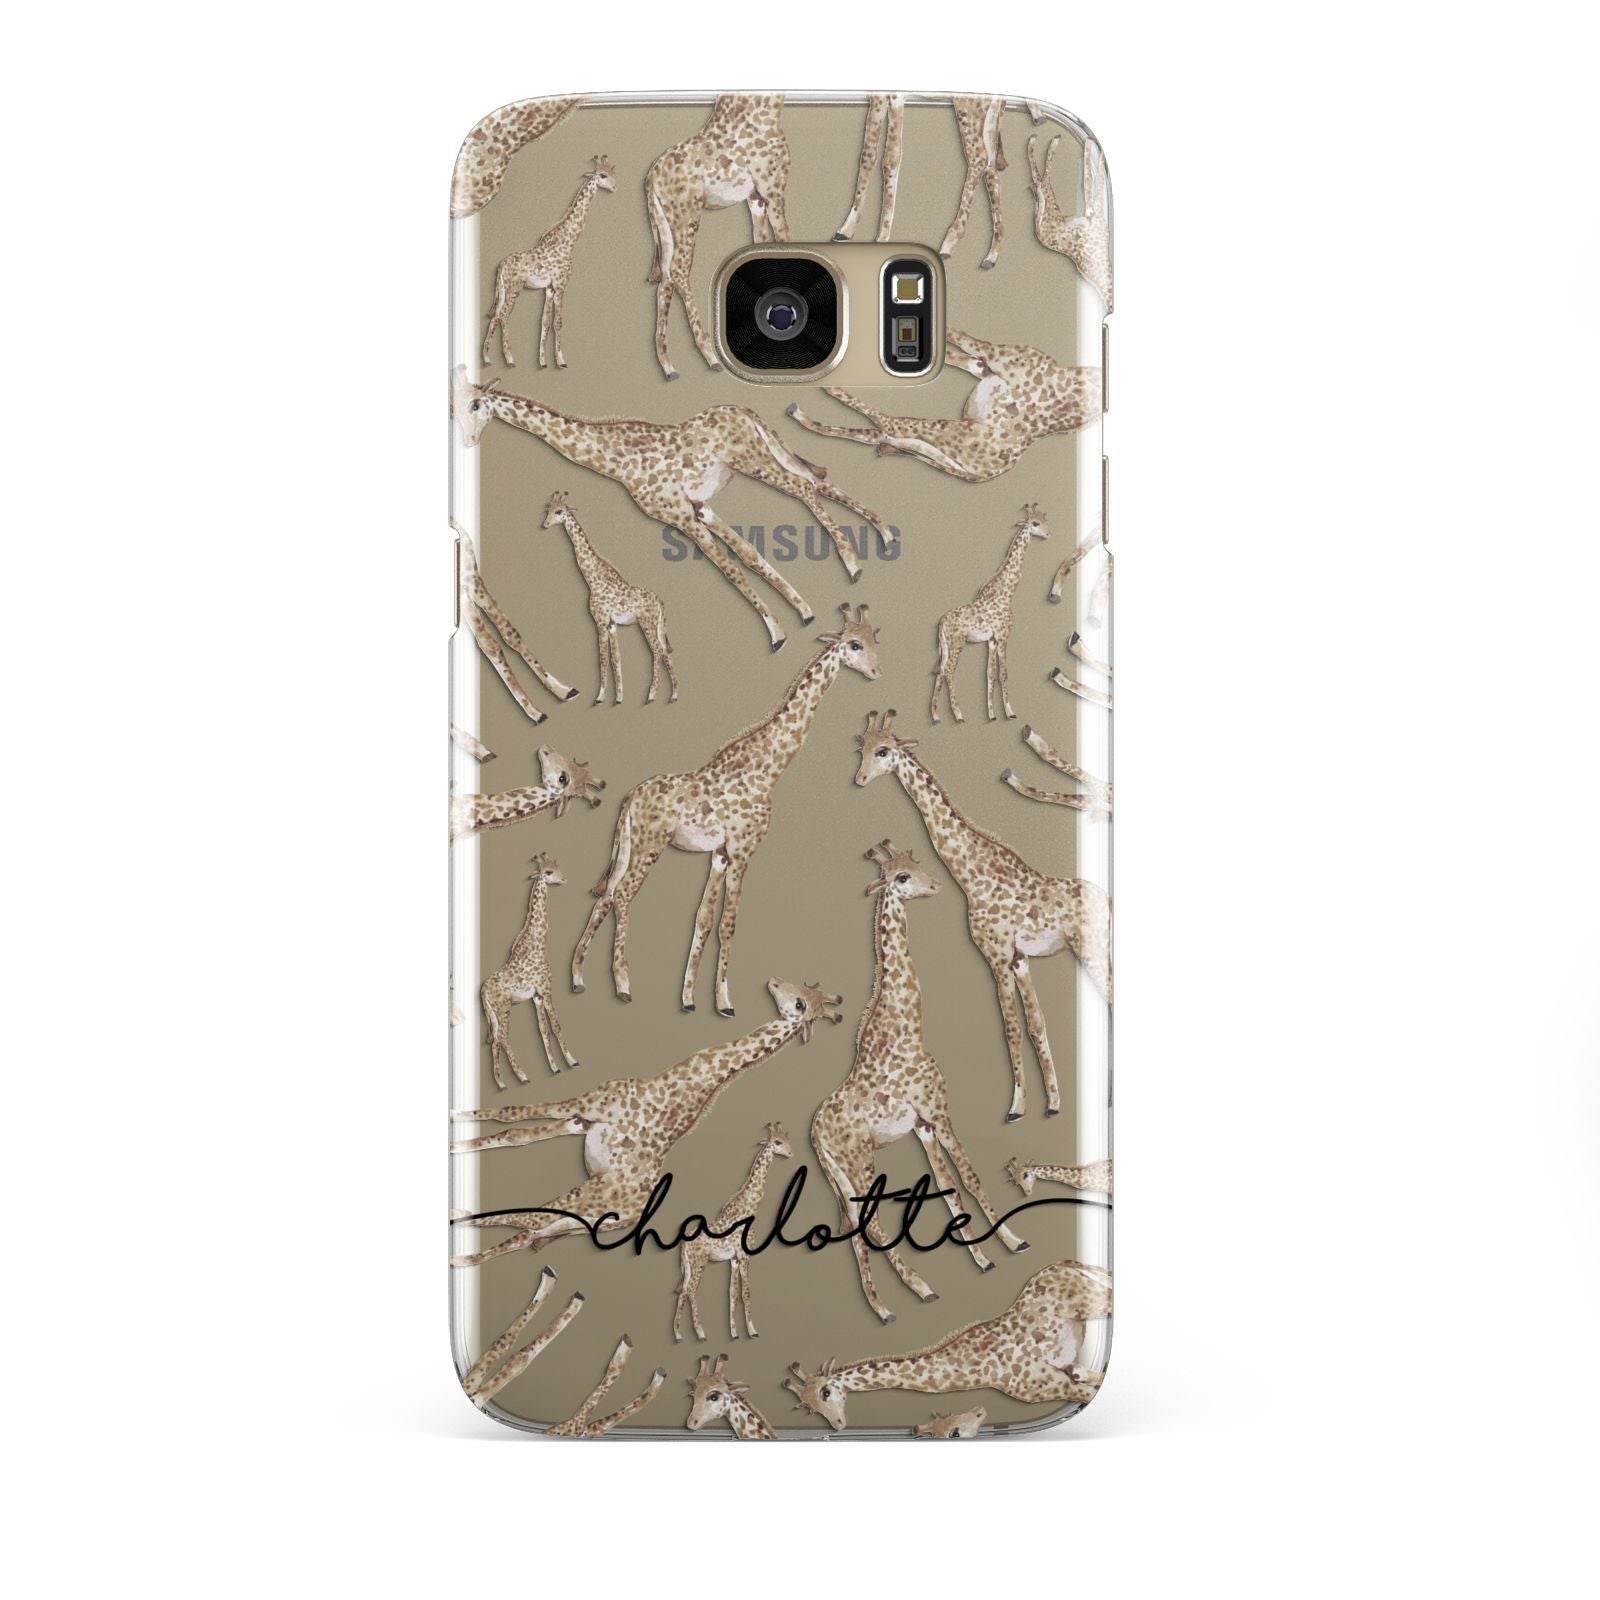 Personalised Giraffes with Name Samsung Galaxy S7 Edge Case